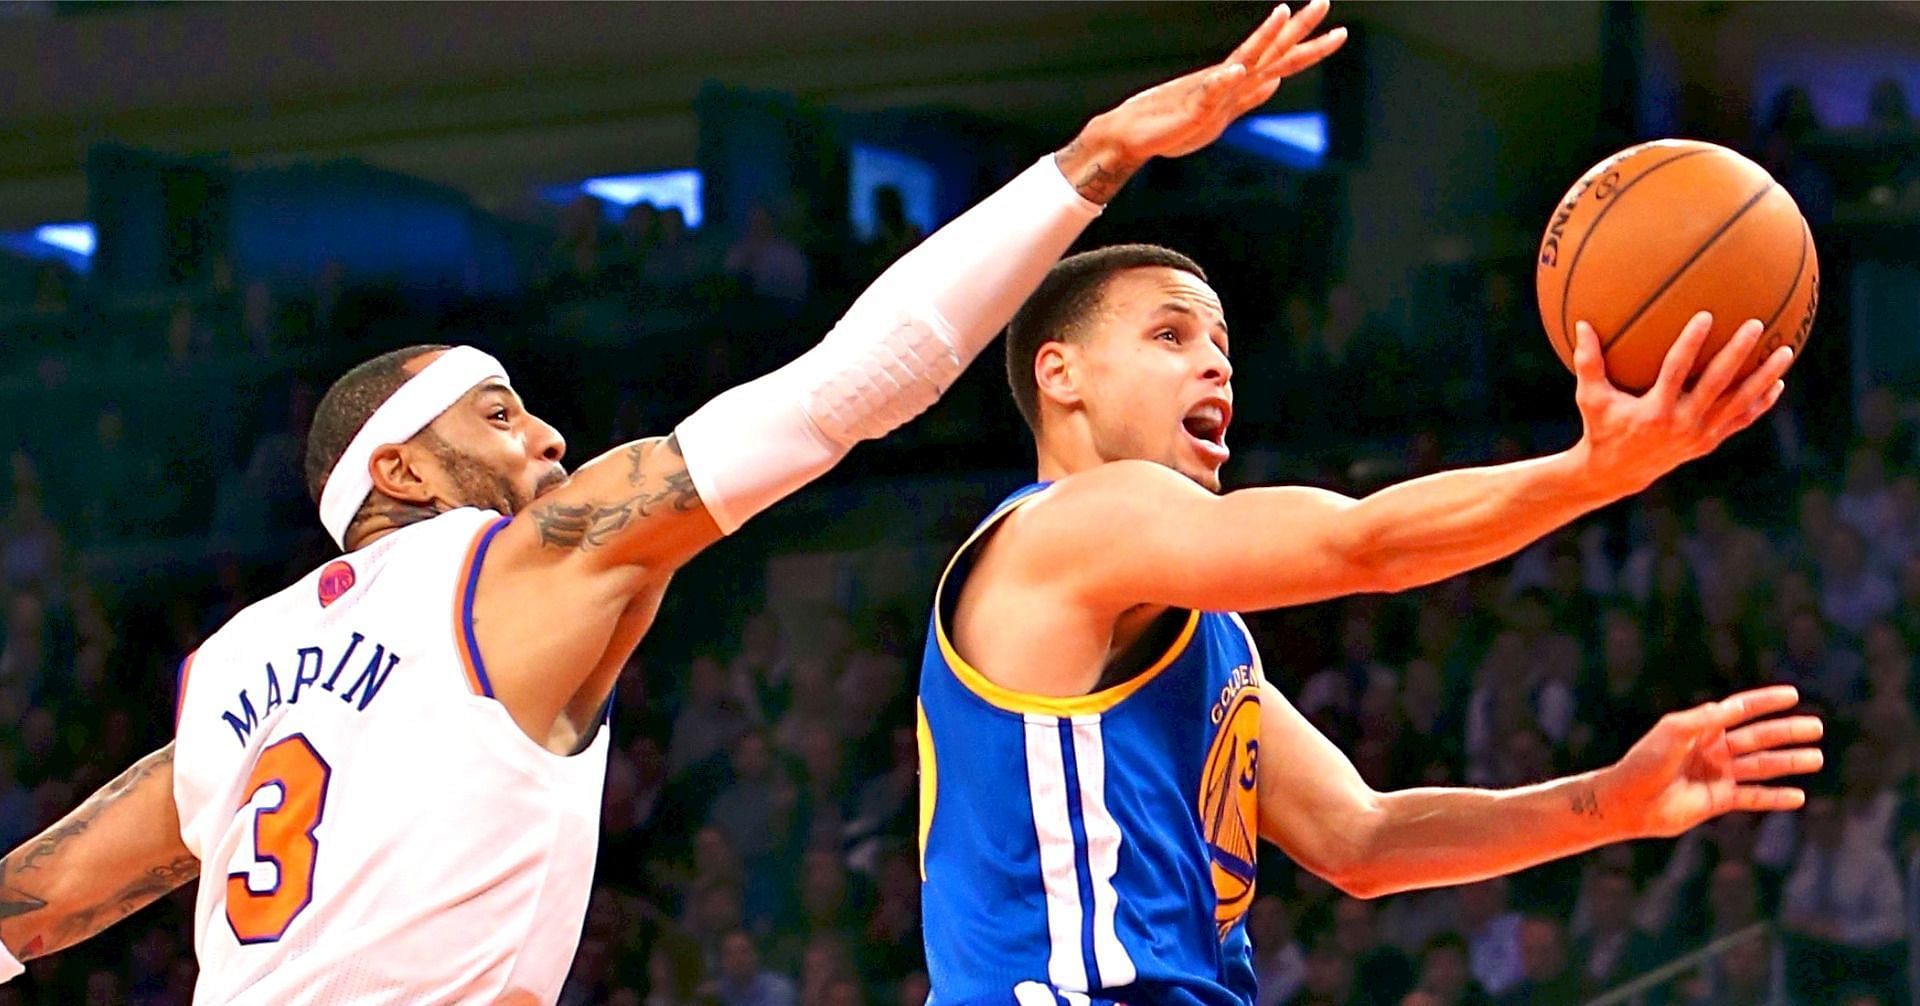 Former New York Knicks forward Kenyon Martin and Golden State Warriors superstar point guard Steph Curry